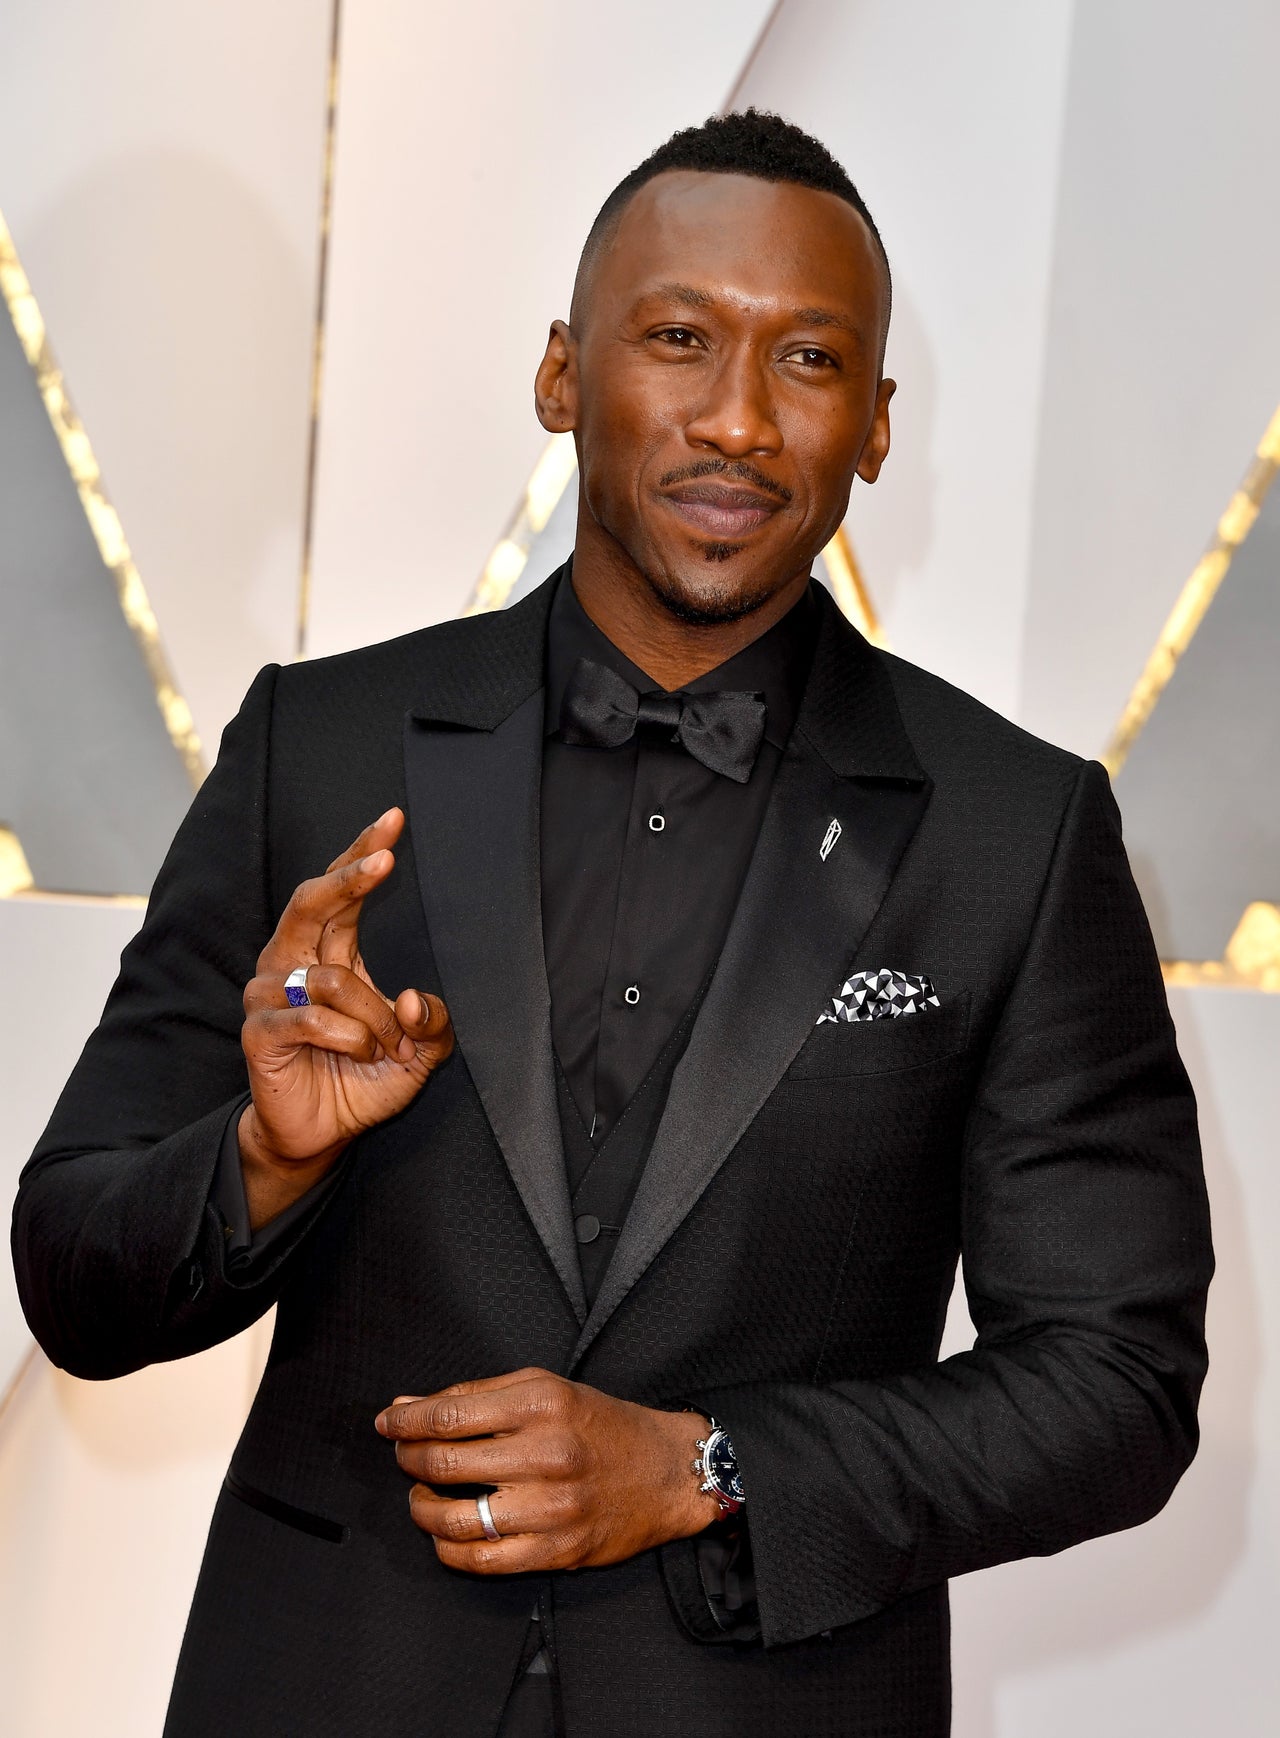 You Have To Hear Mahershala Ali's Raps From Back In The Day ...